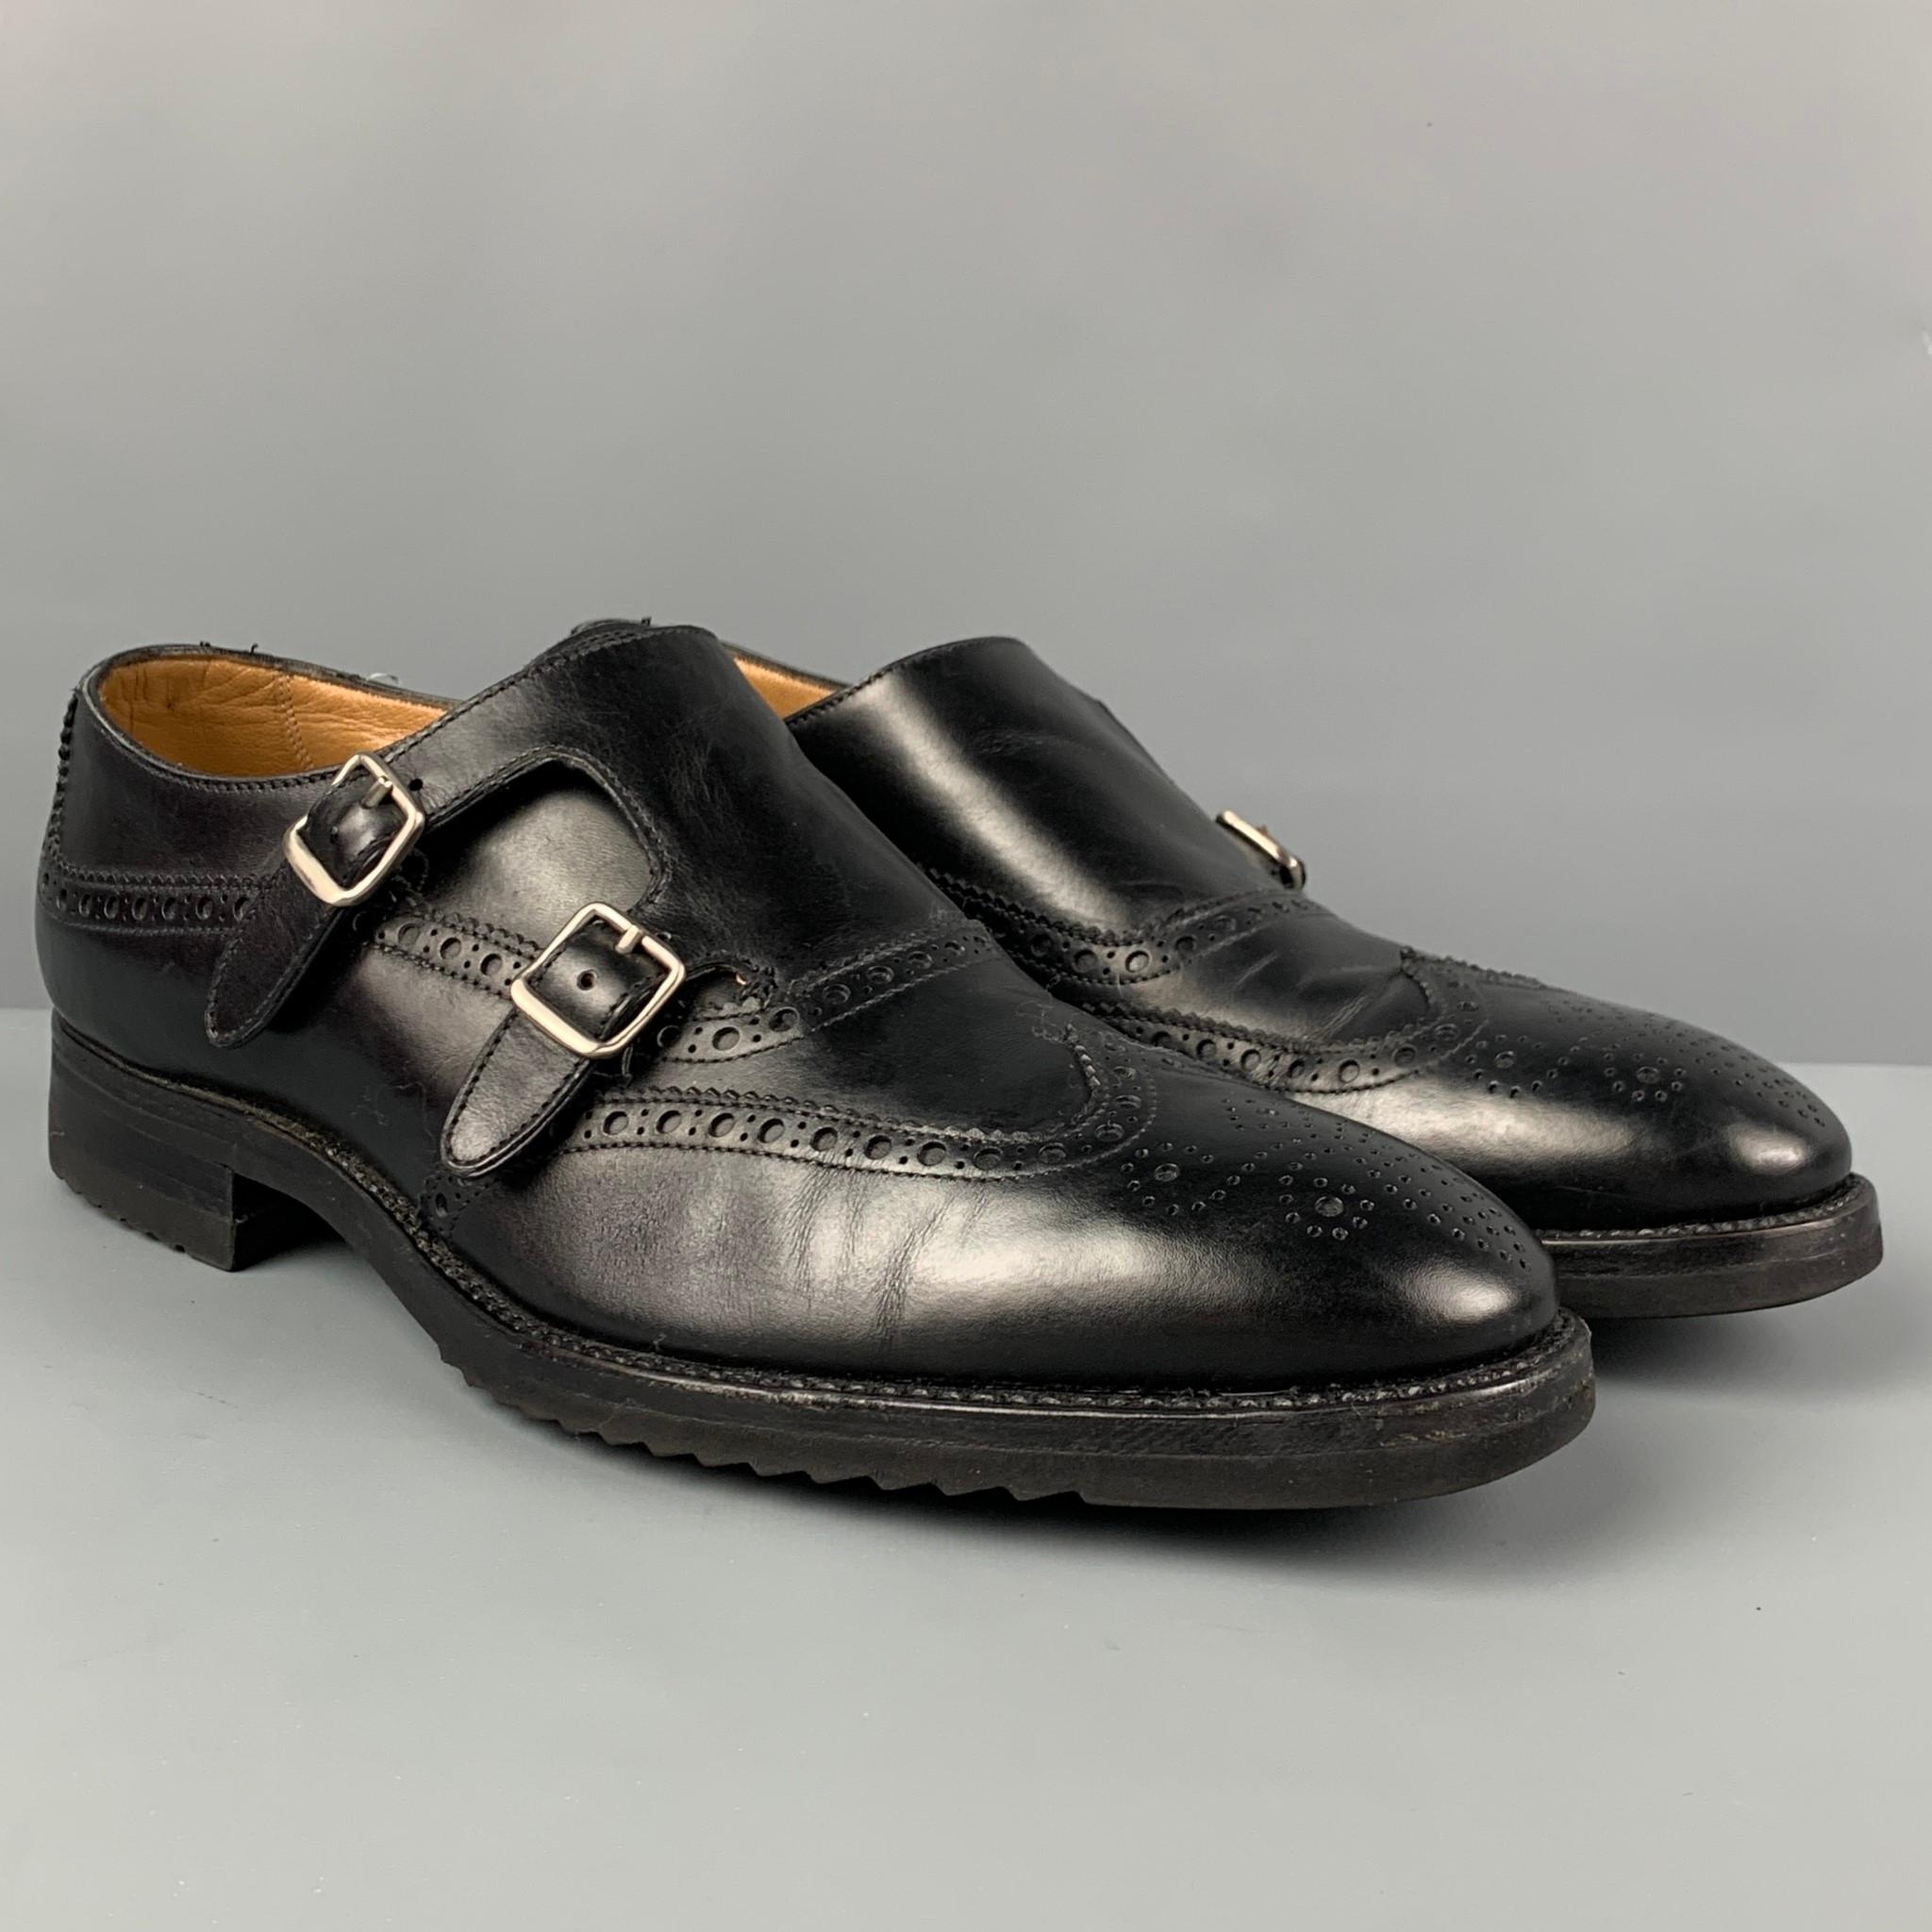 GRAVATI shoes comes in a black perforated leather featuring a double monk strap and a rubber sole. Made in Italy. 

Very Good Pre-Owned Condition.
Marked: 19199 10 M  787

Outsole: 12 in. x 4.25 in. 